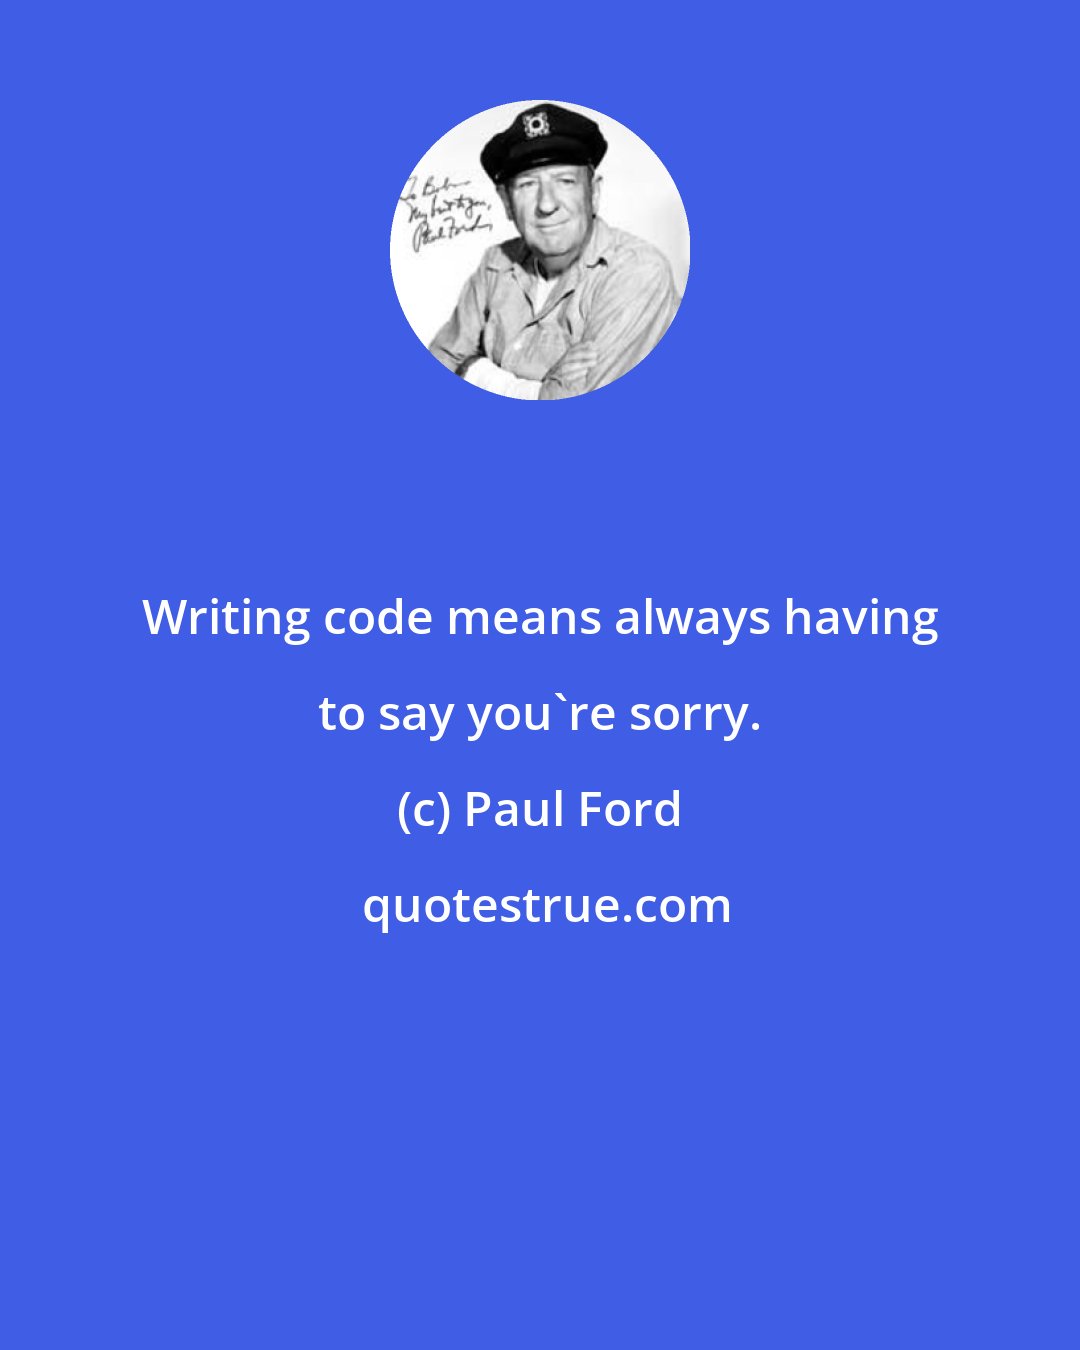 Paul Ford: Writing code means always having to say you're sorry.